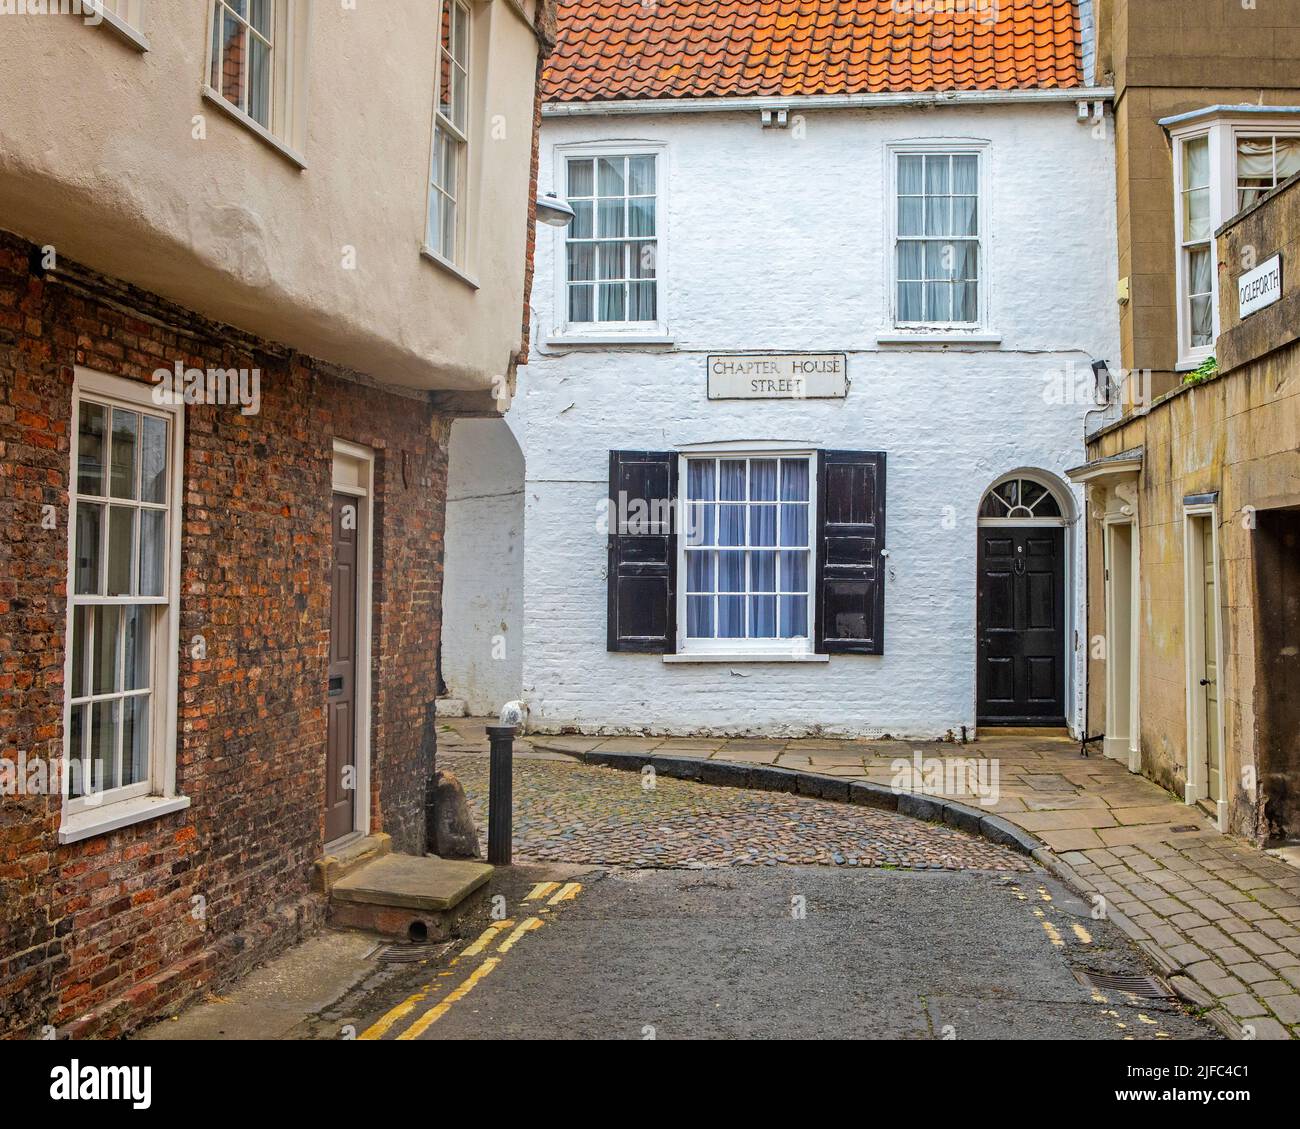 York, UK - June 6th 2022: The old architecture of Ogleforth and Chapter House Street in the beautiful city of York, UK. Stock Photo